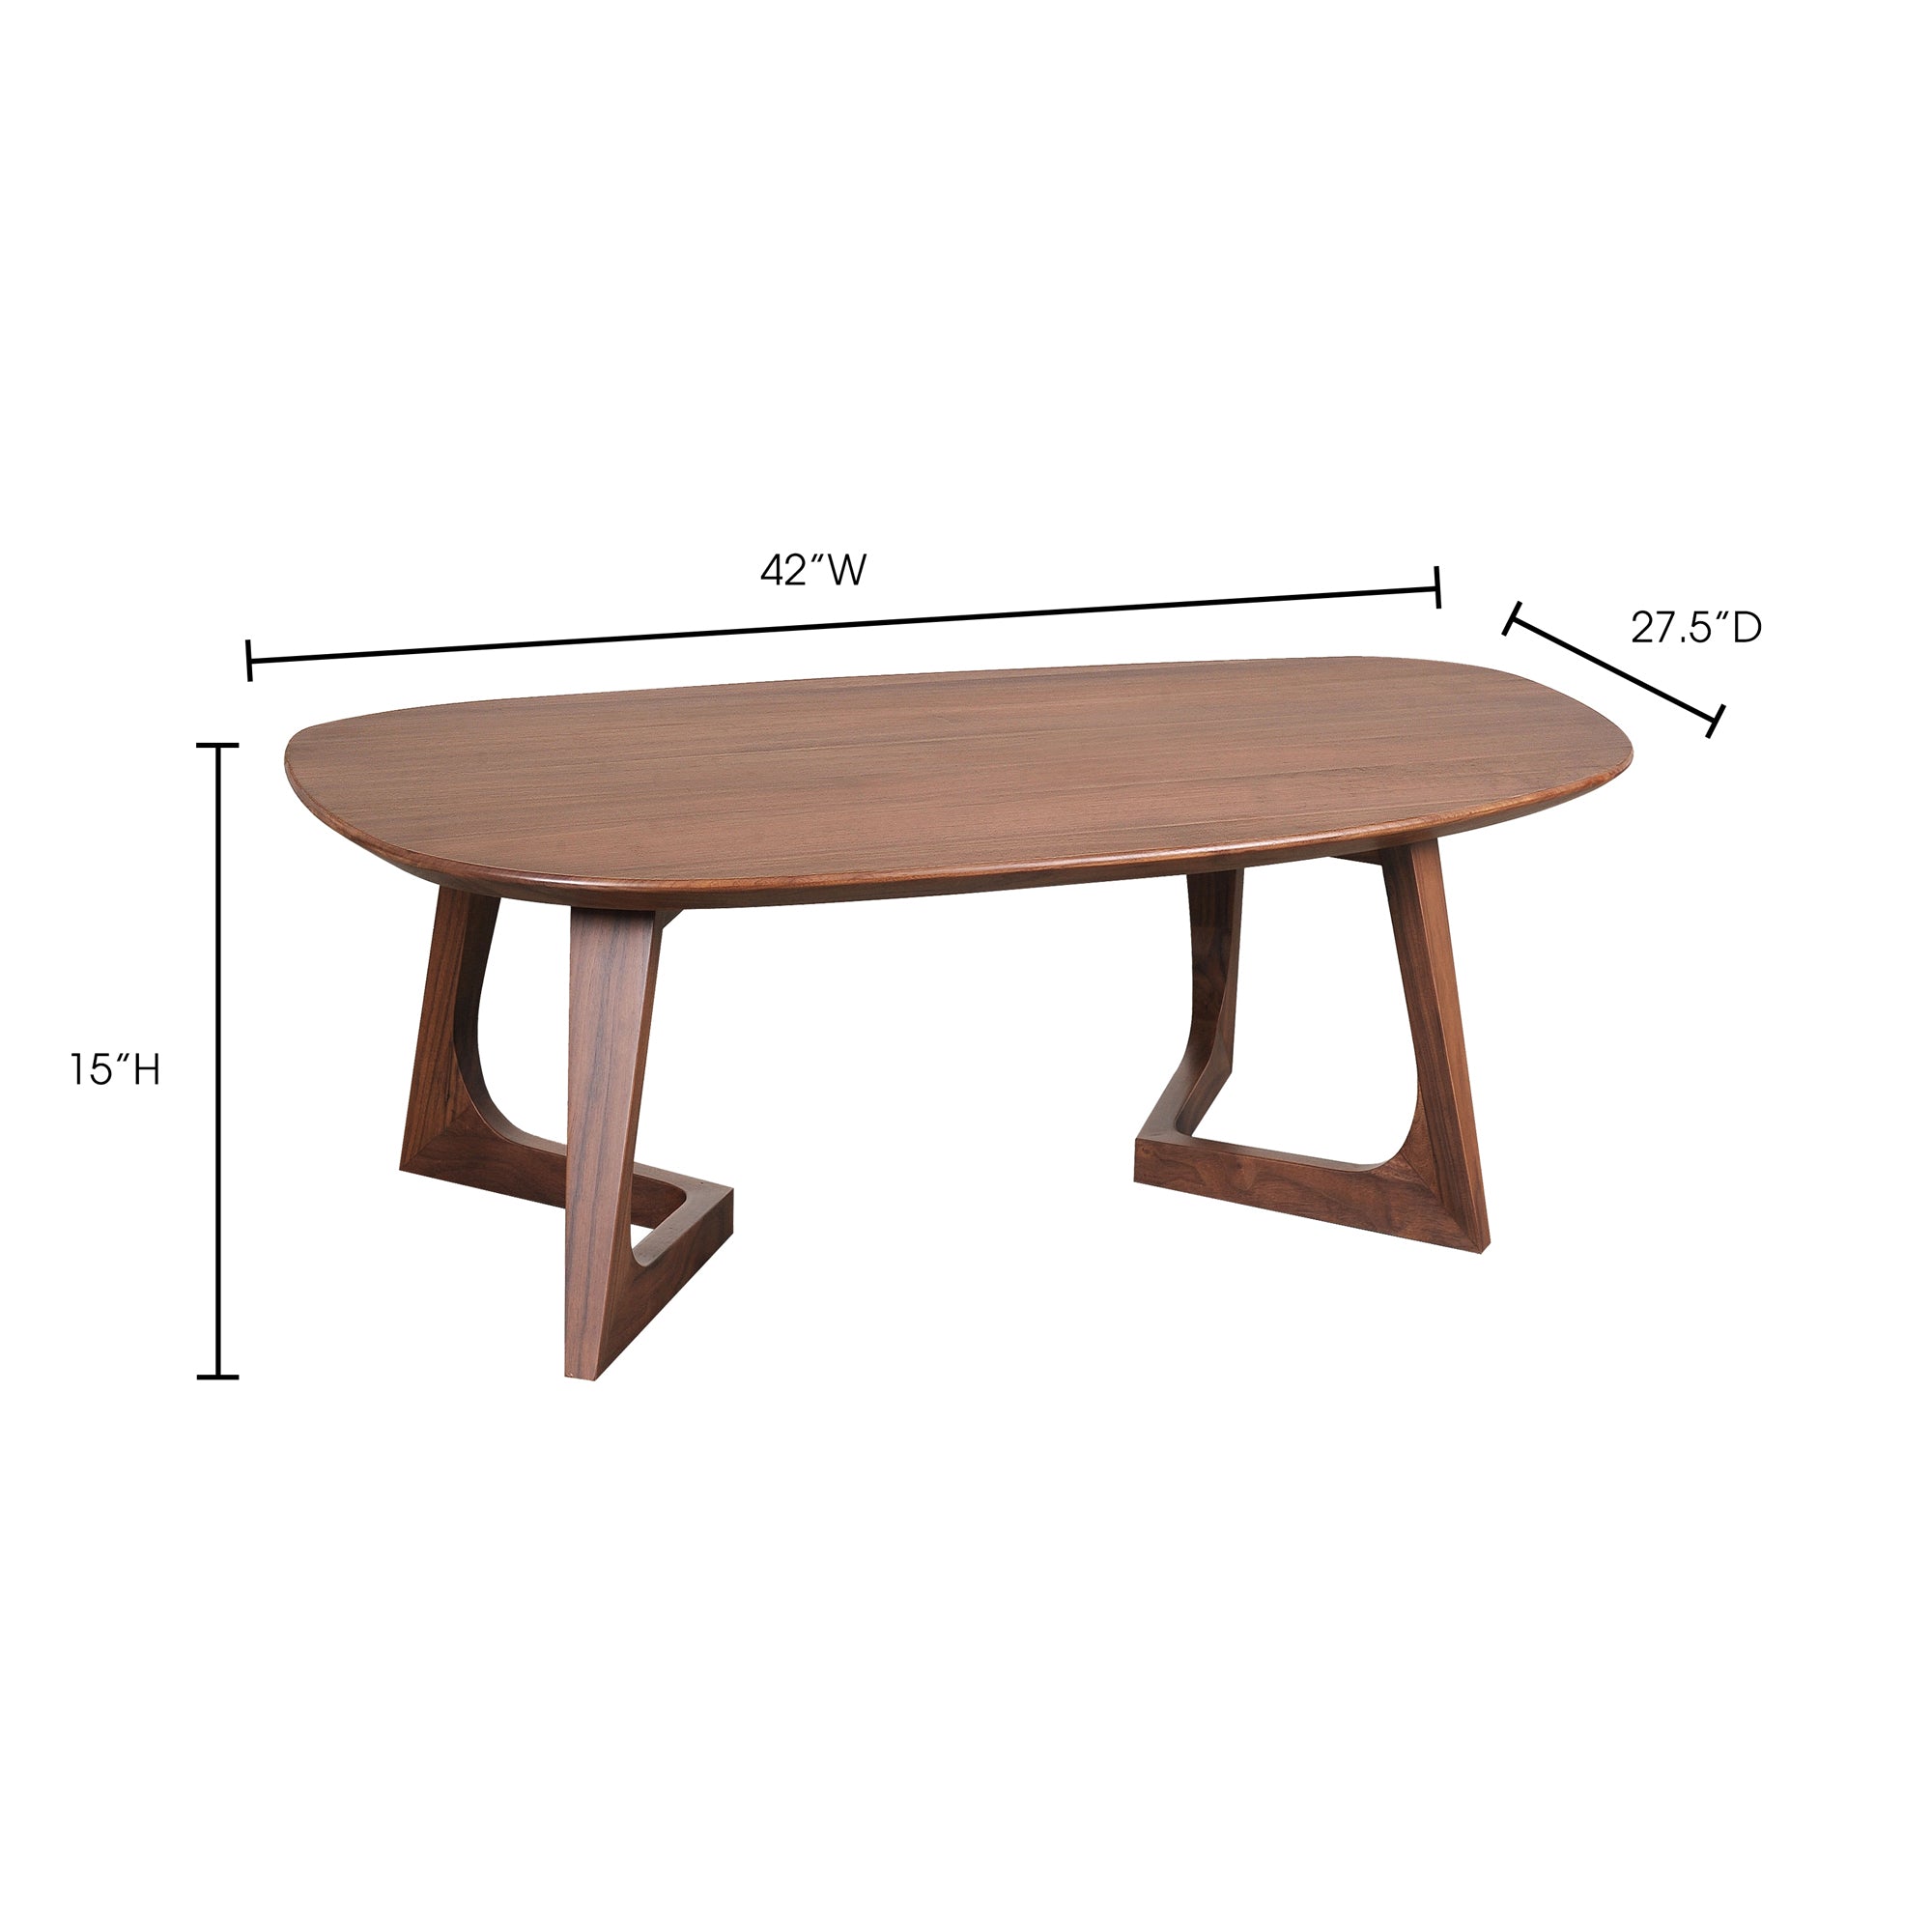 Godenza Cocktail Table Small - Furniture - Tipplergoods